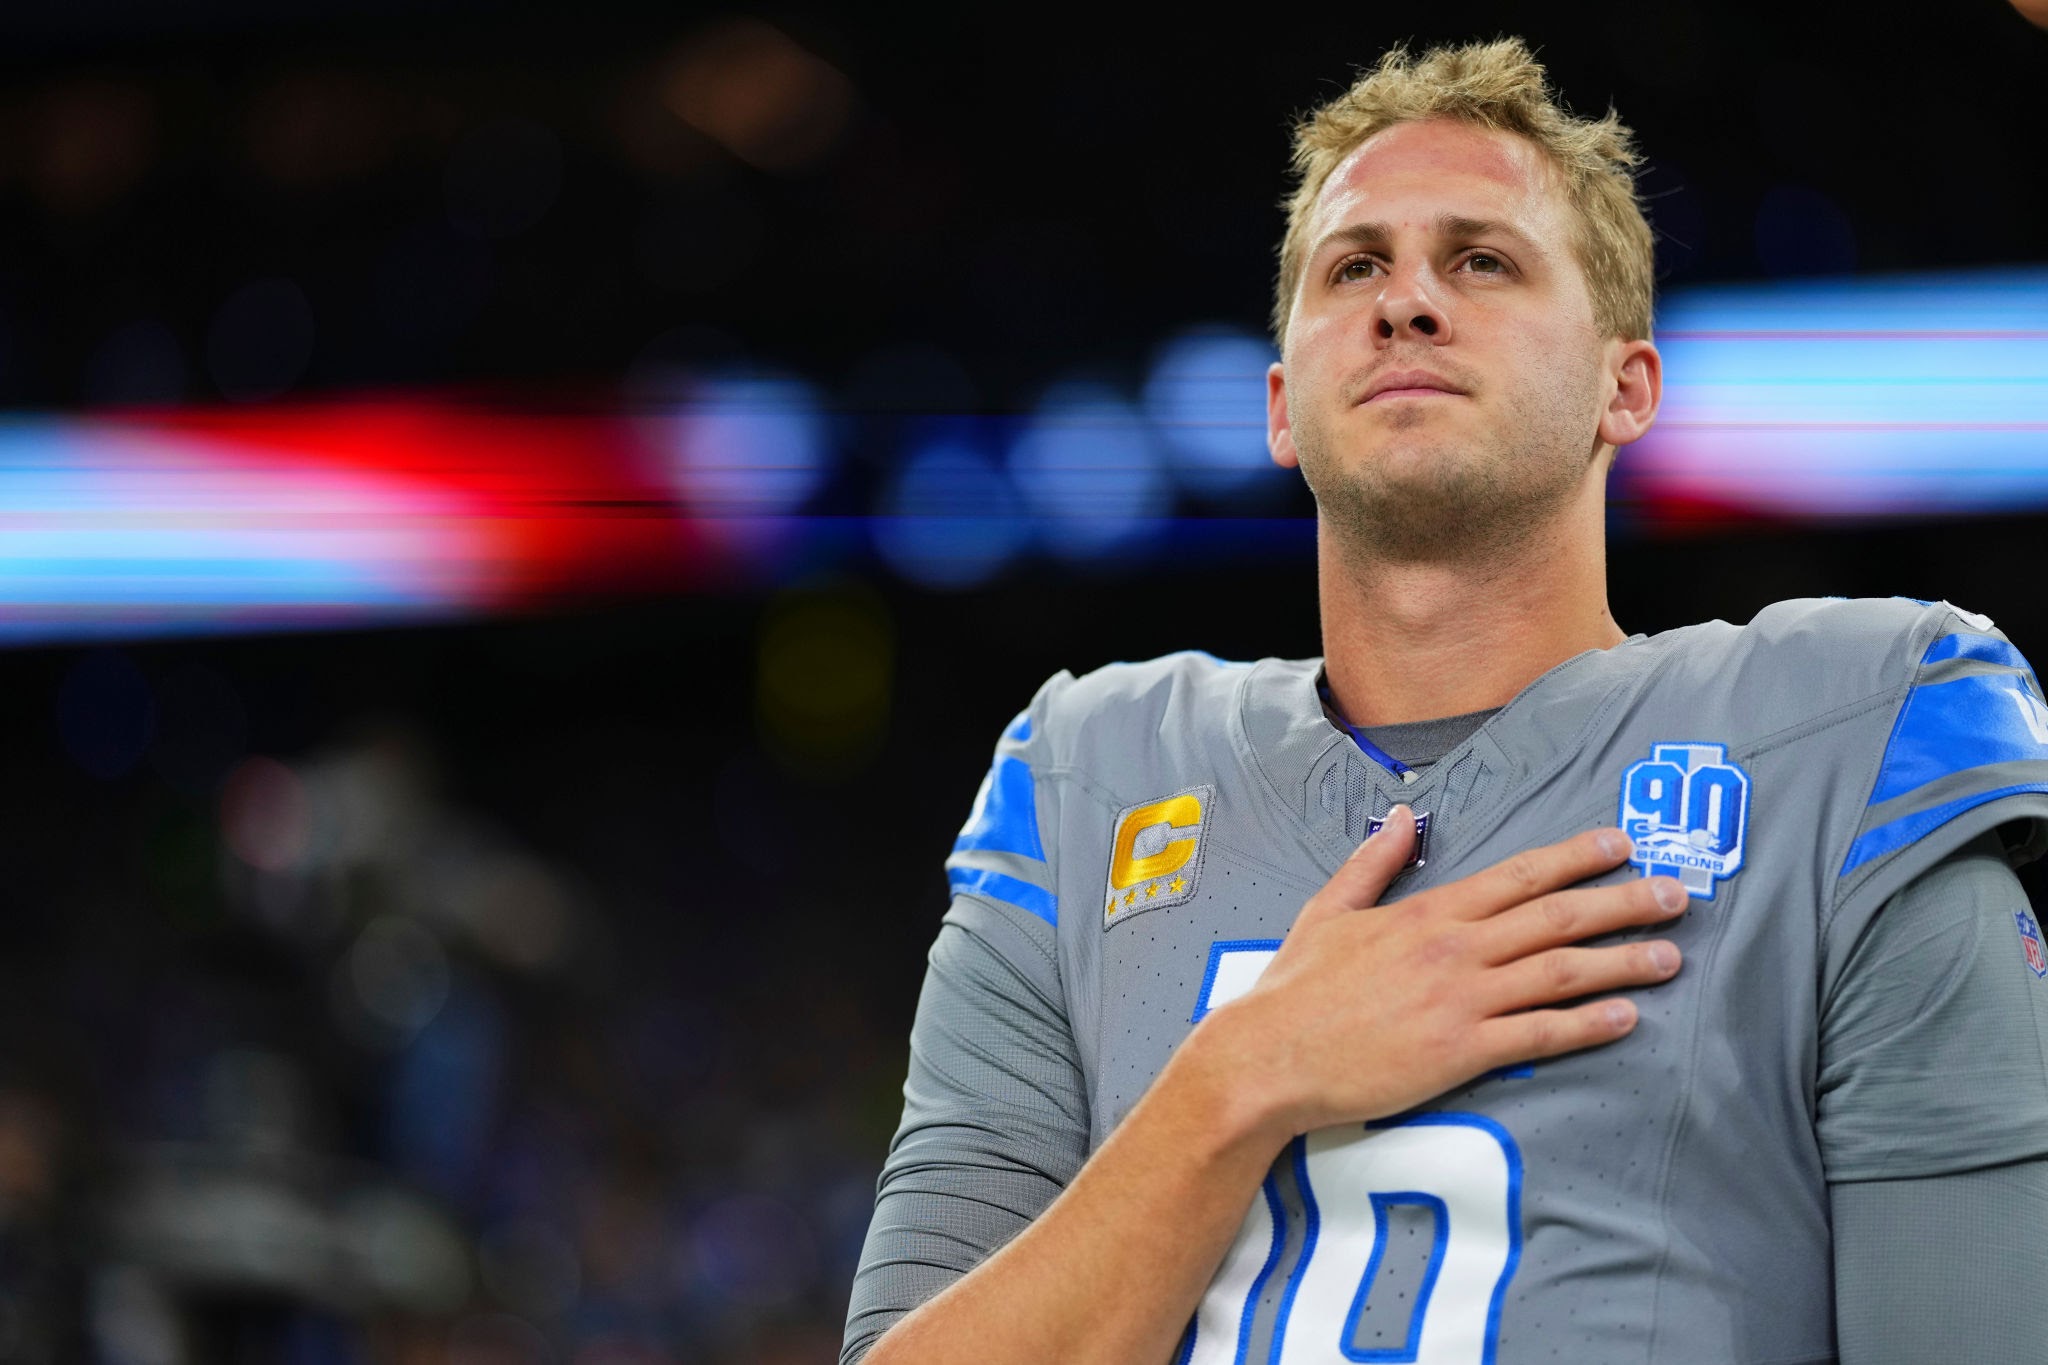 Star QB Jared Goff of Detroit Lions Leaves To… $87 Million Deal